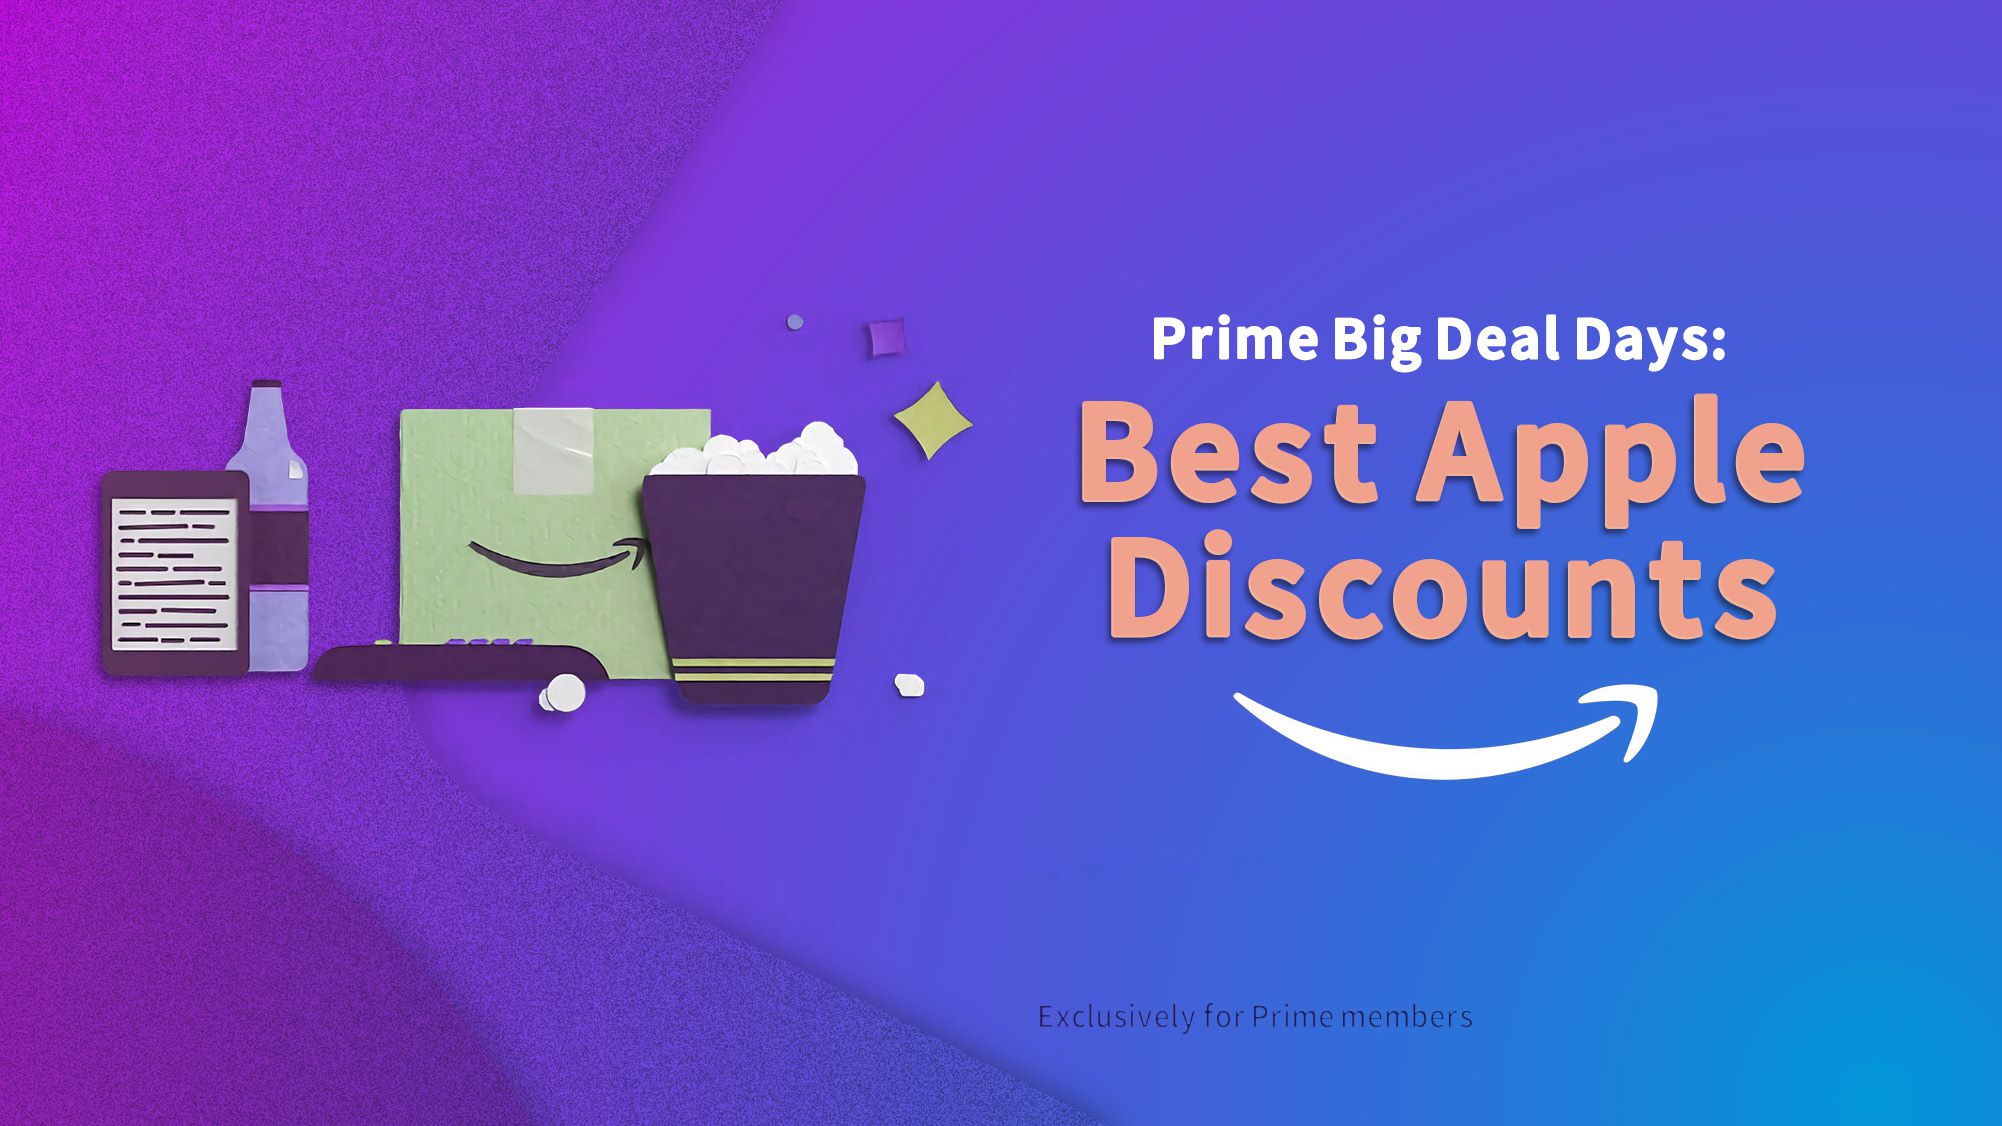 How big will Prime Big Deals Day be?